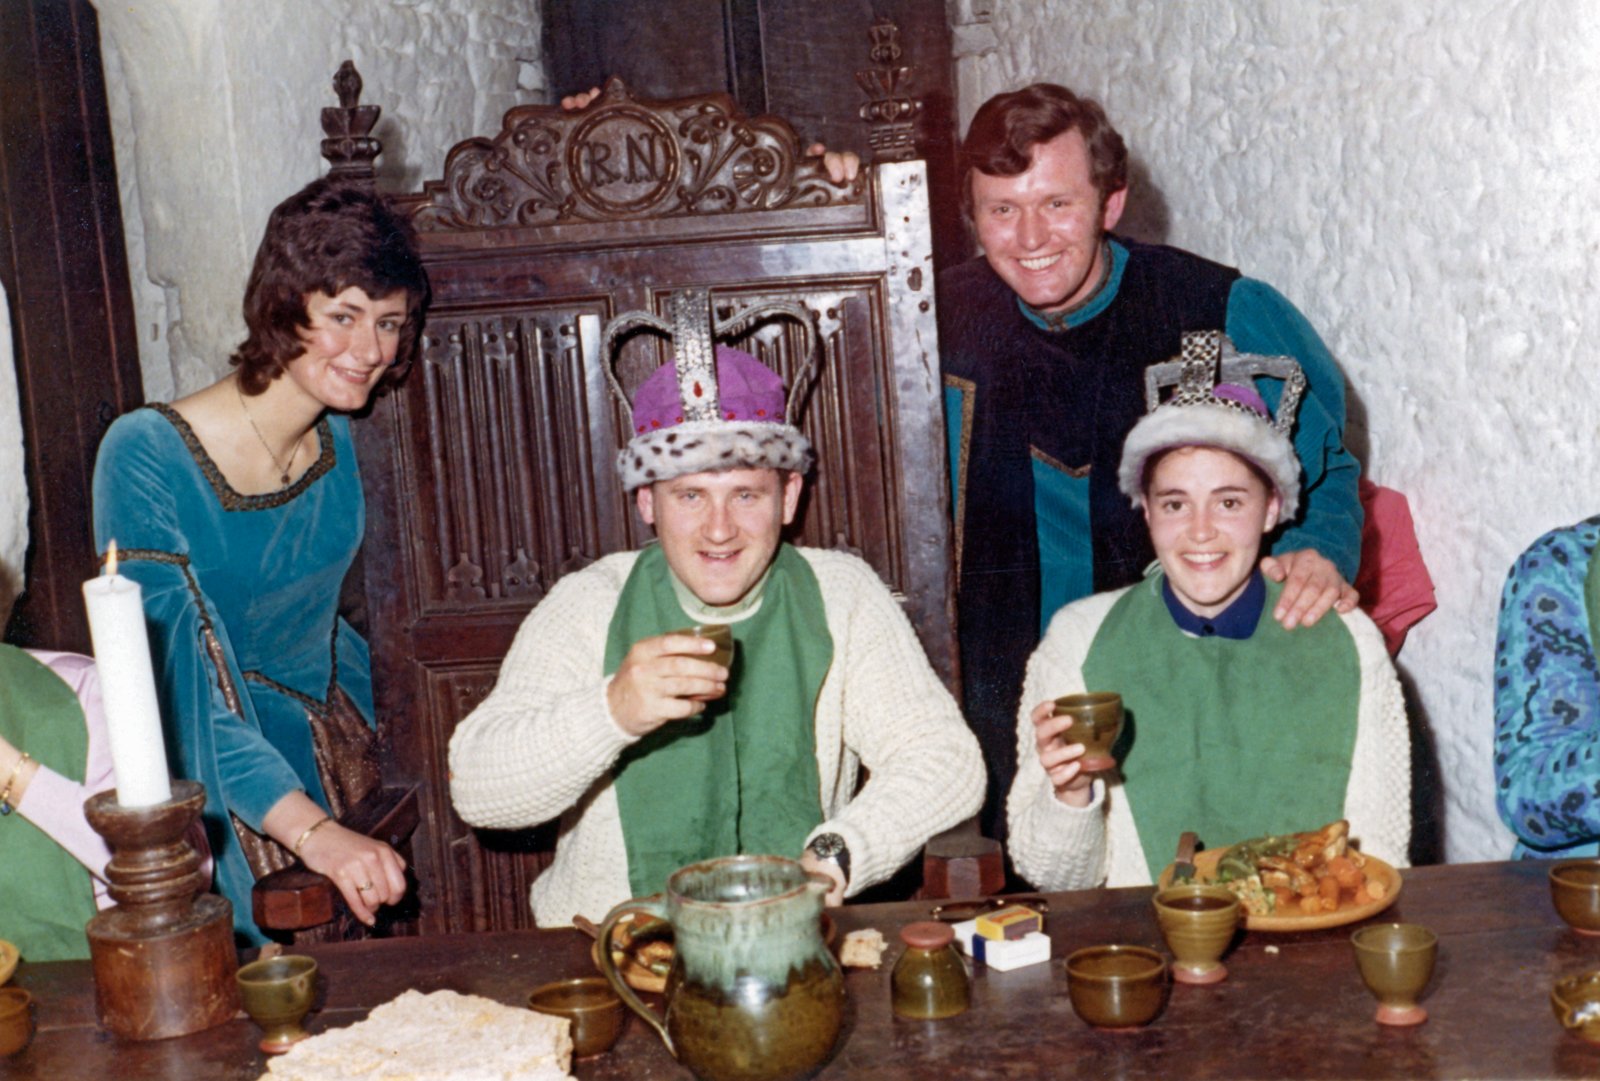 During their first trip to Ireland in 1972, Peter and Margaret (McIninch) Shea (Patrick’s parents) were selected as the lord and lady of the evening at a medieval-style banquet that was held at Bunratty Castle in County Clare.